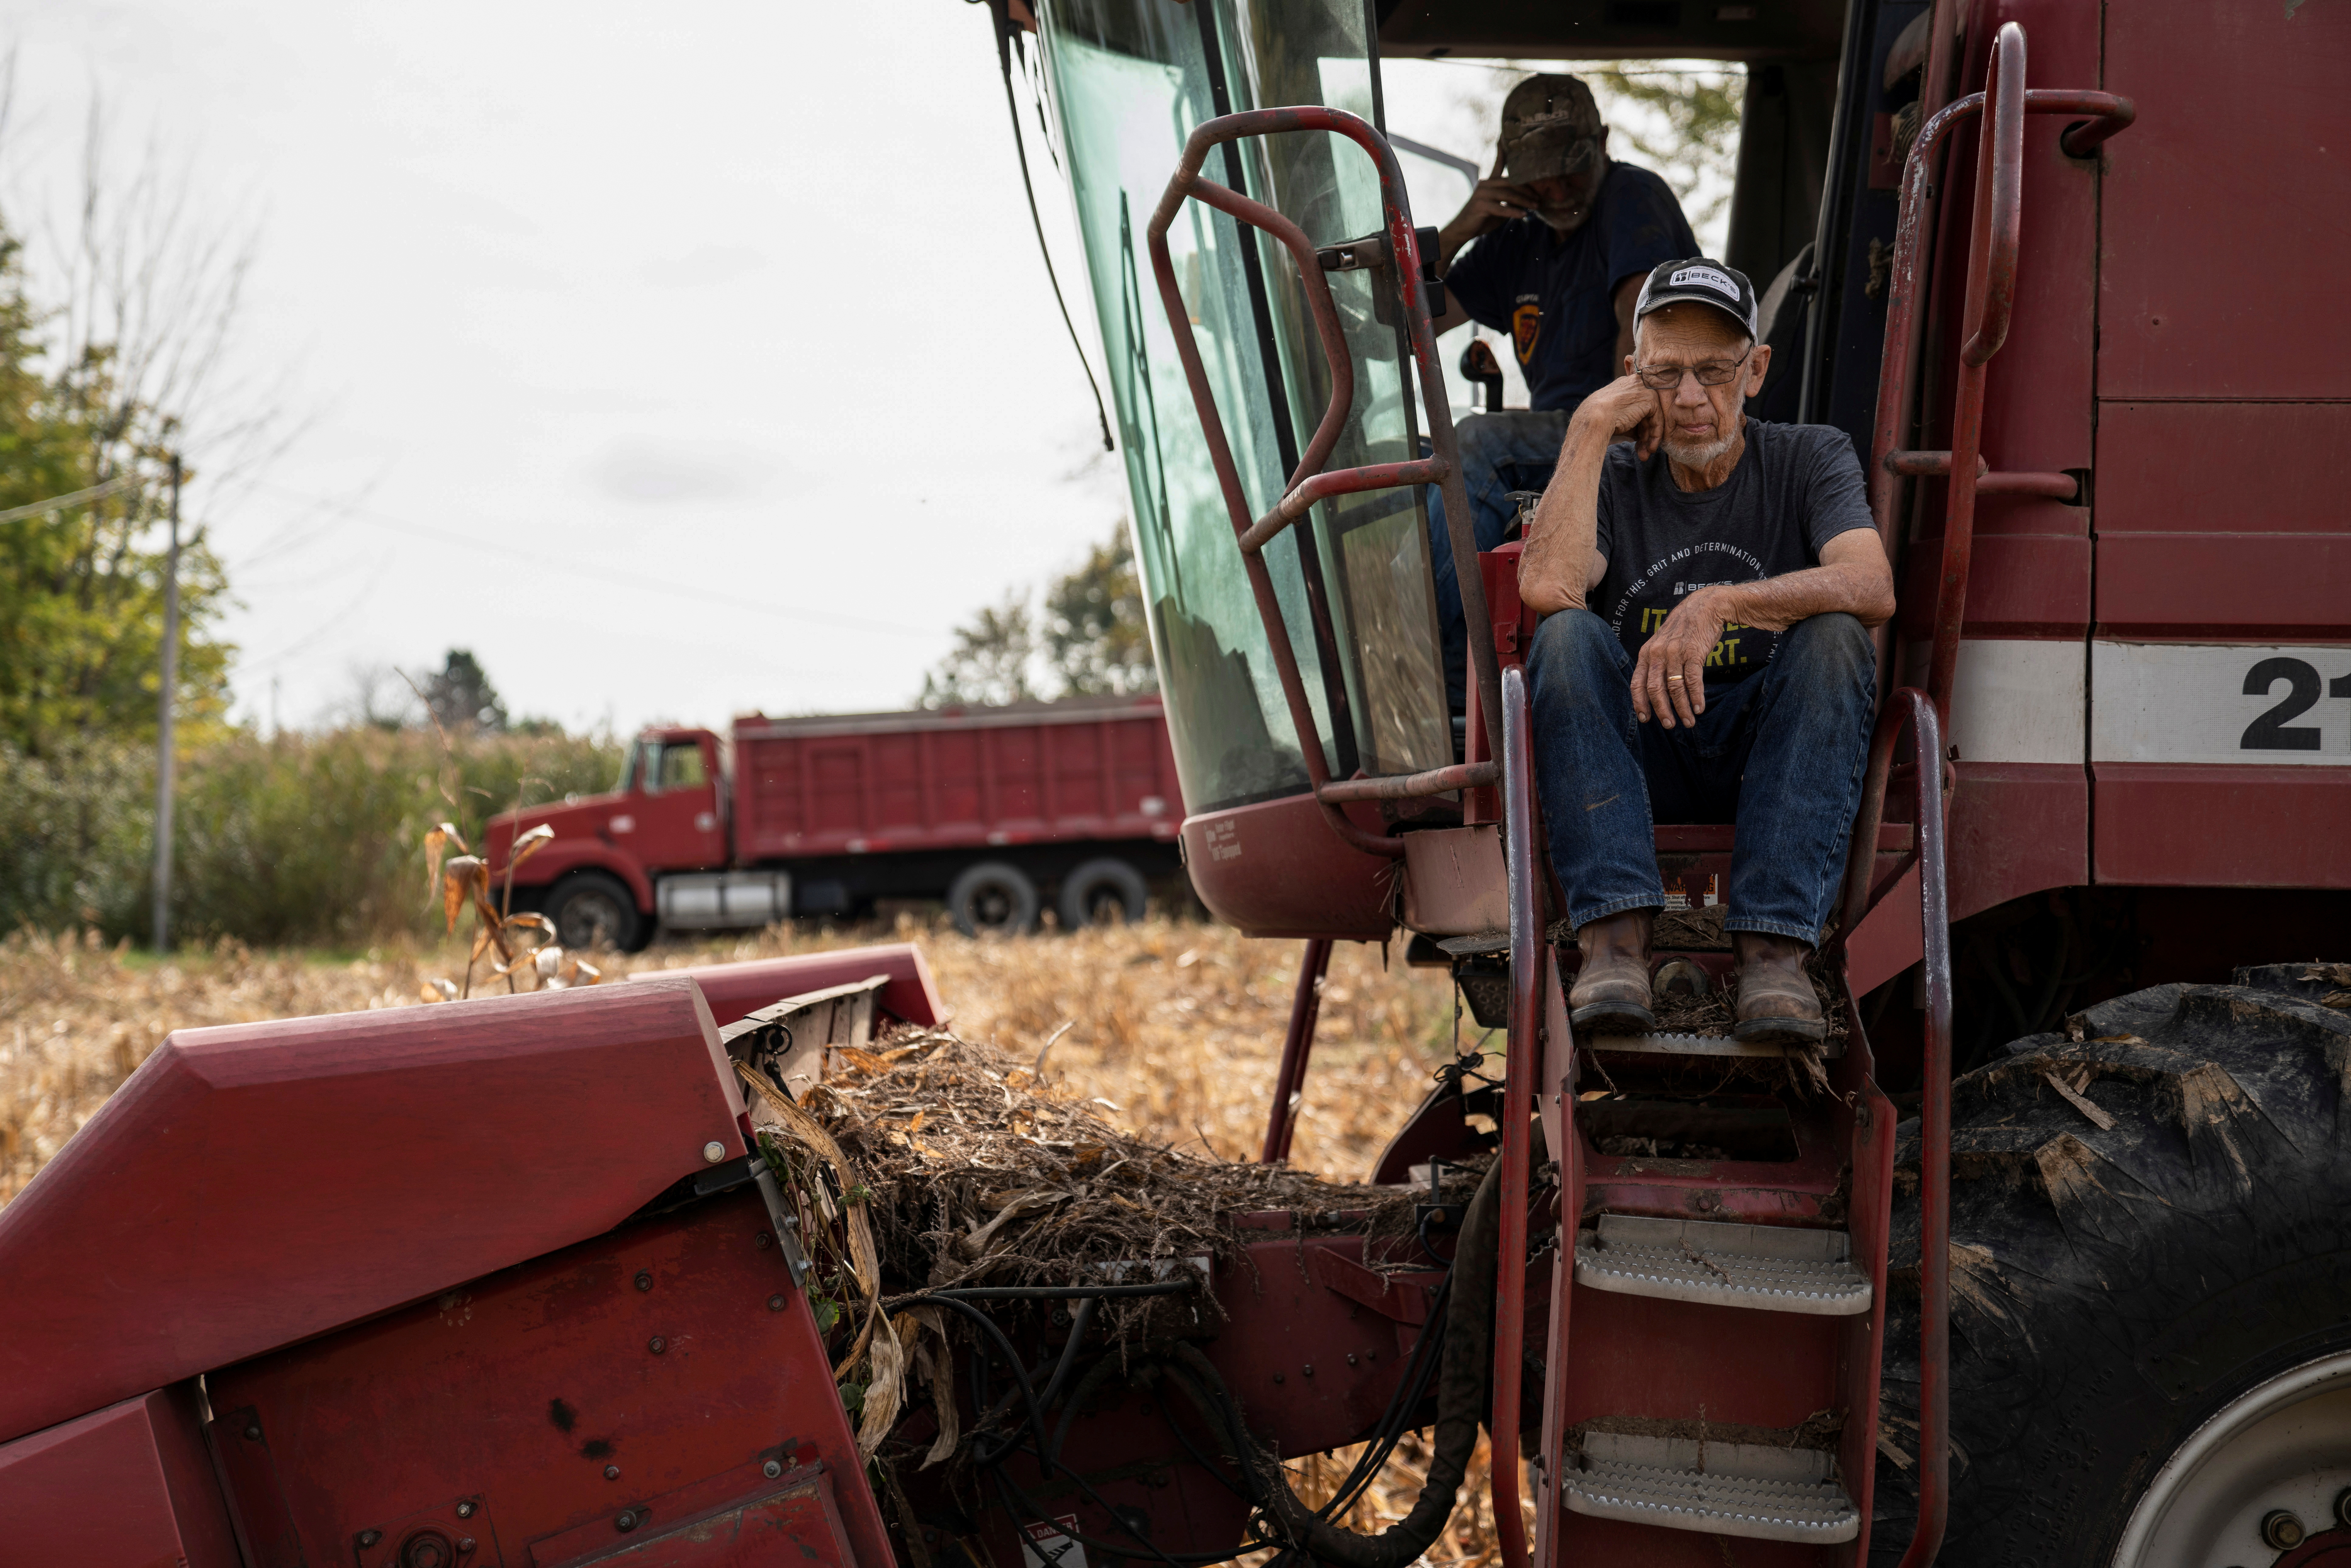 Ag components shortage roils farm sector, equipment makers during harvest